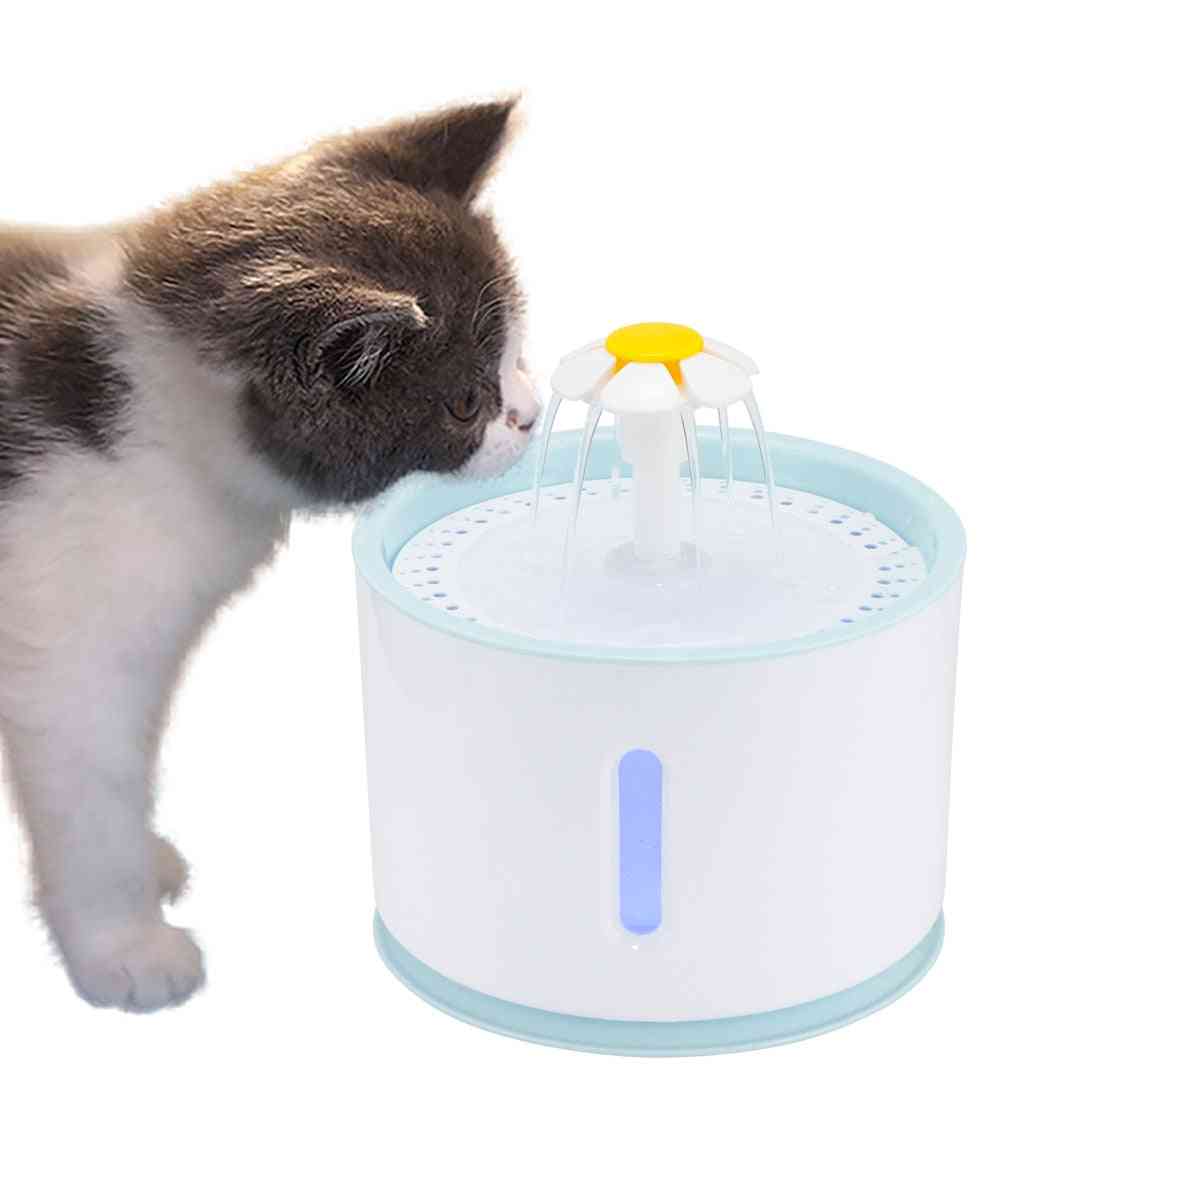 Led Electric Usb Automatic Pet Cat Water Fountain Mute Drinker Feeder Bowl & Dispenser